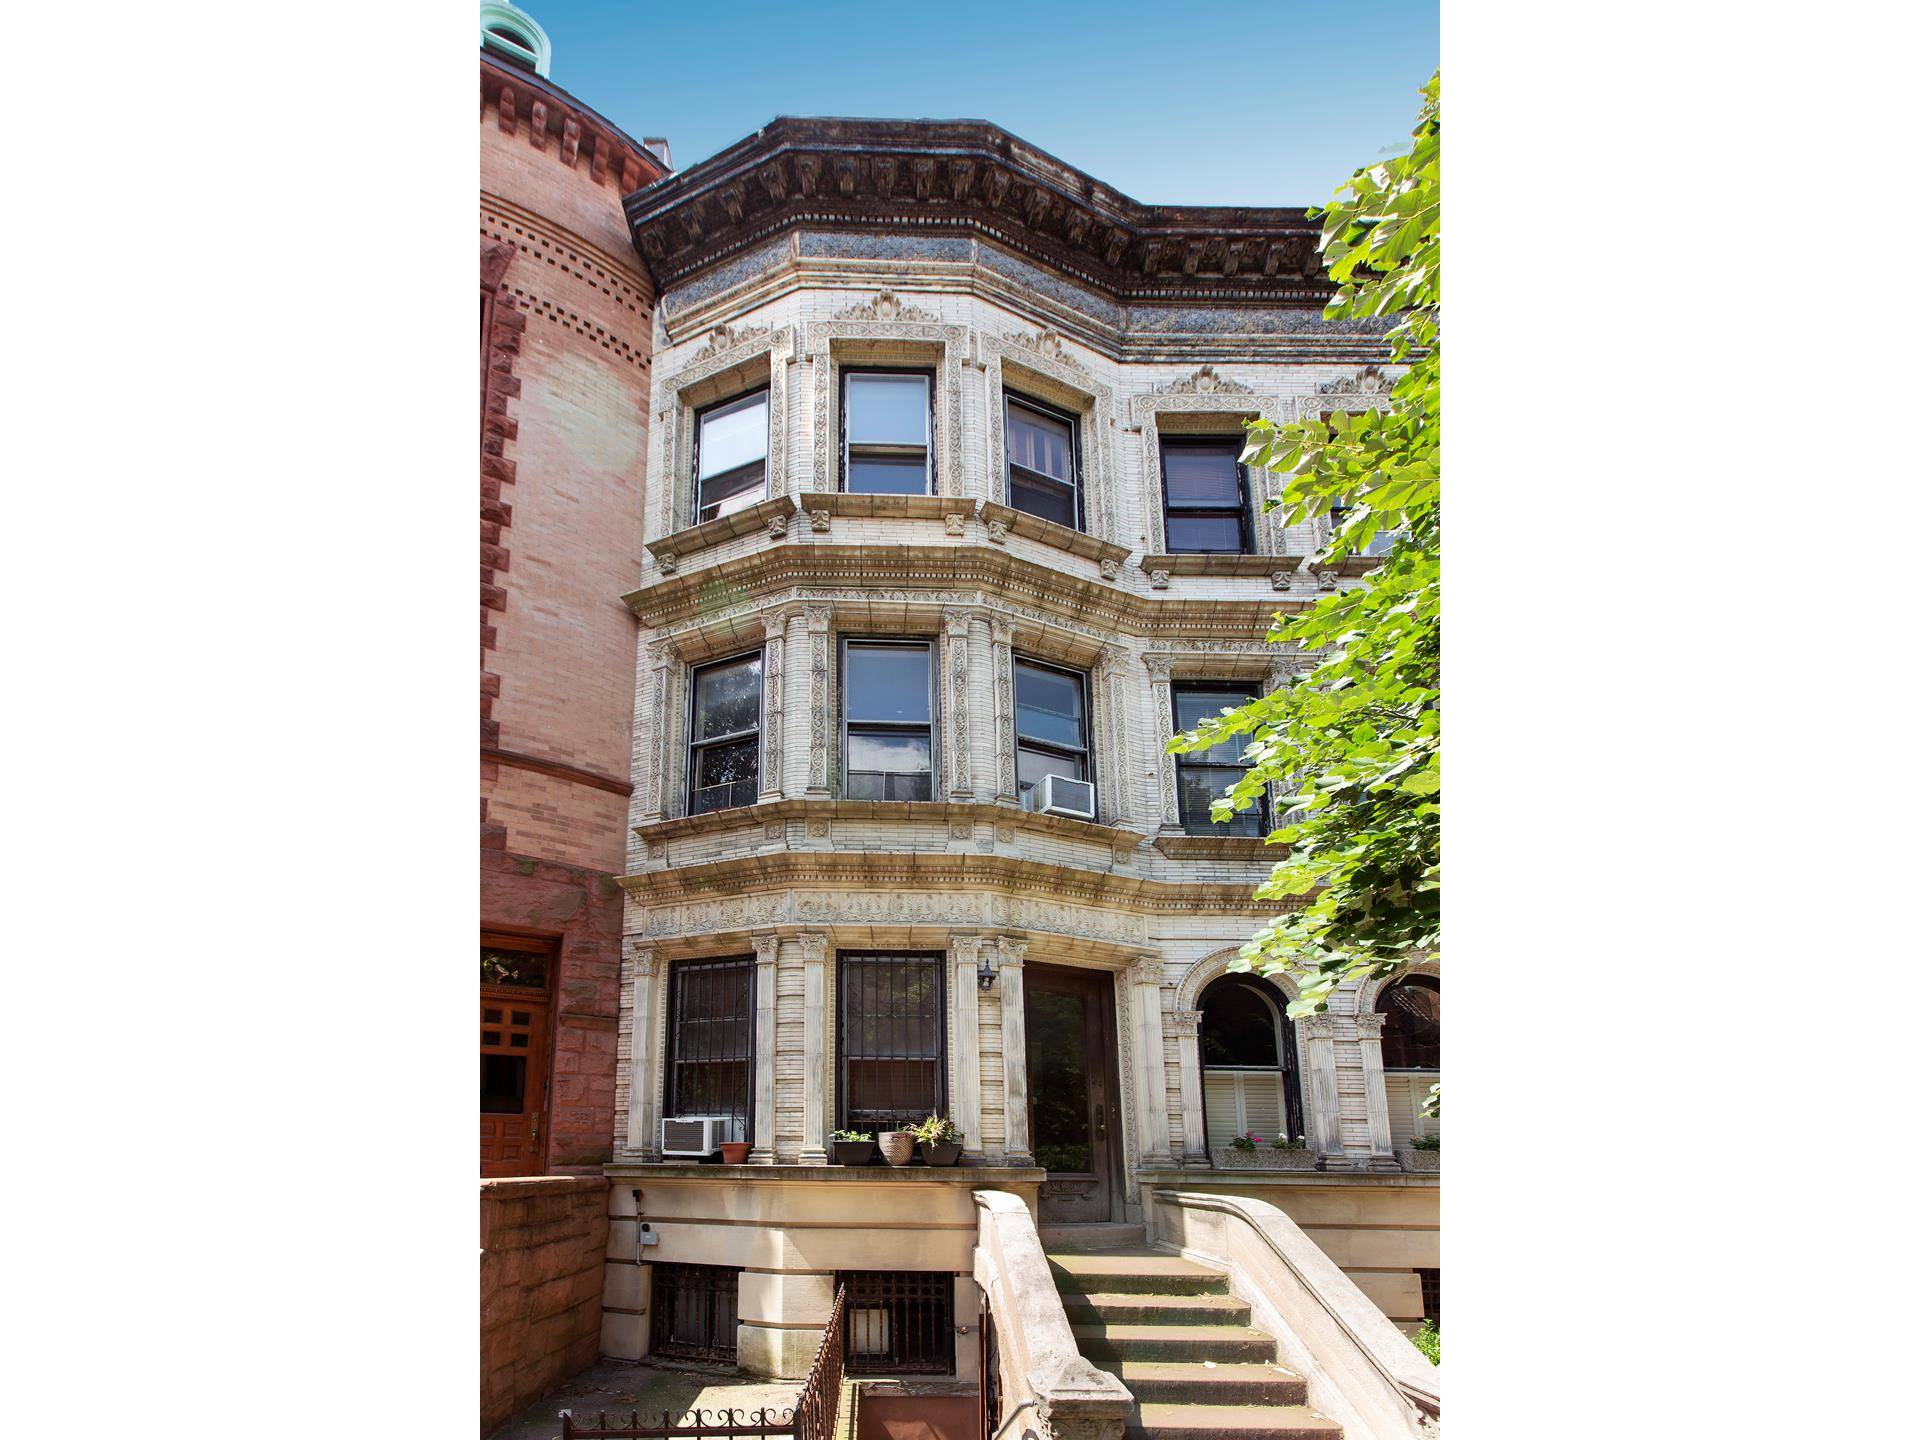 Welcome to 34 Montgomery Place located on one of Park Slope's most magical blocks.